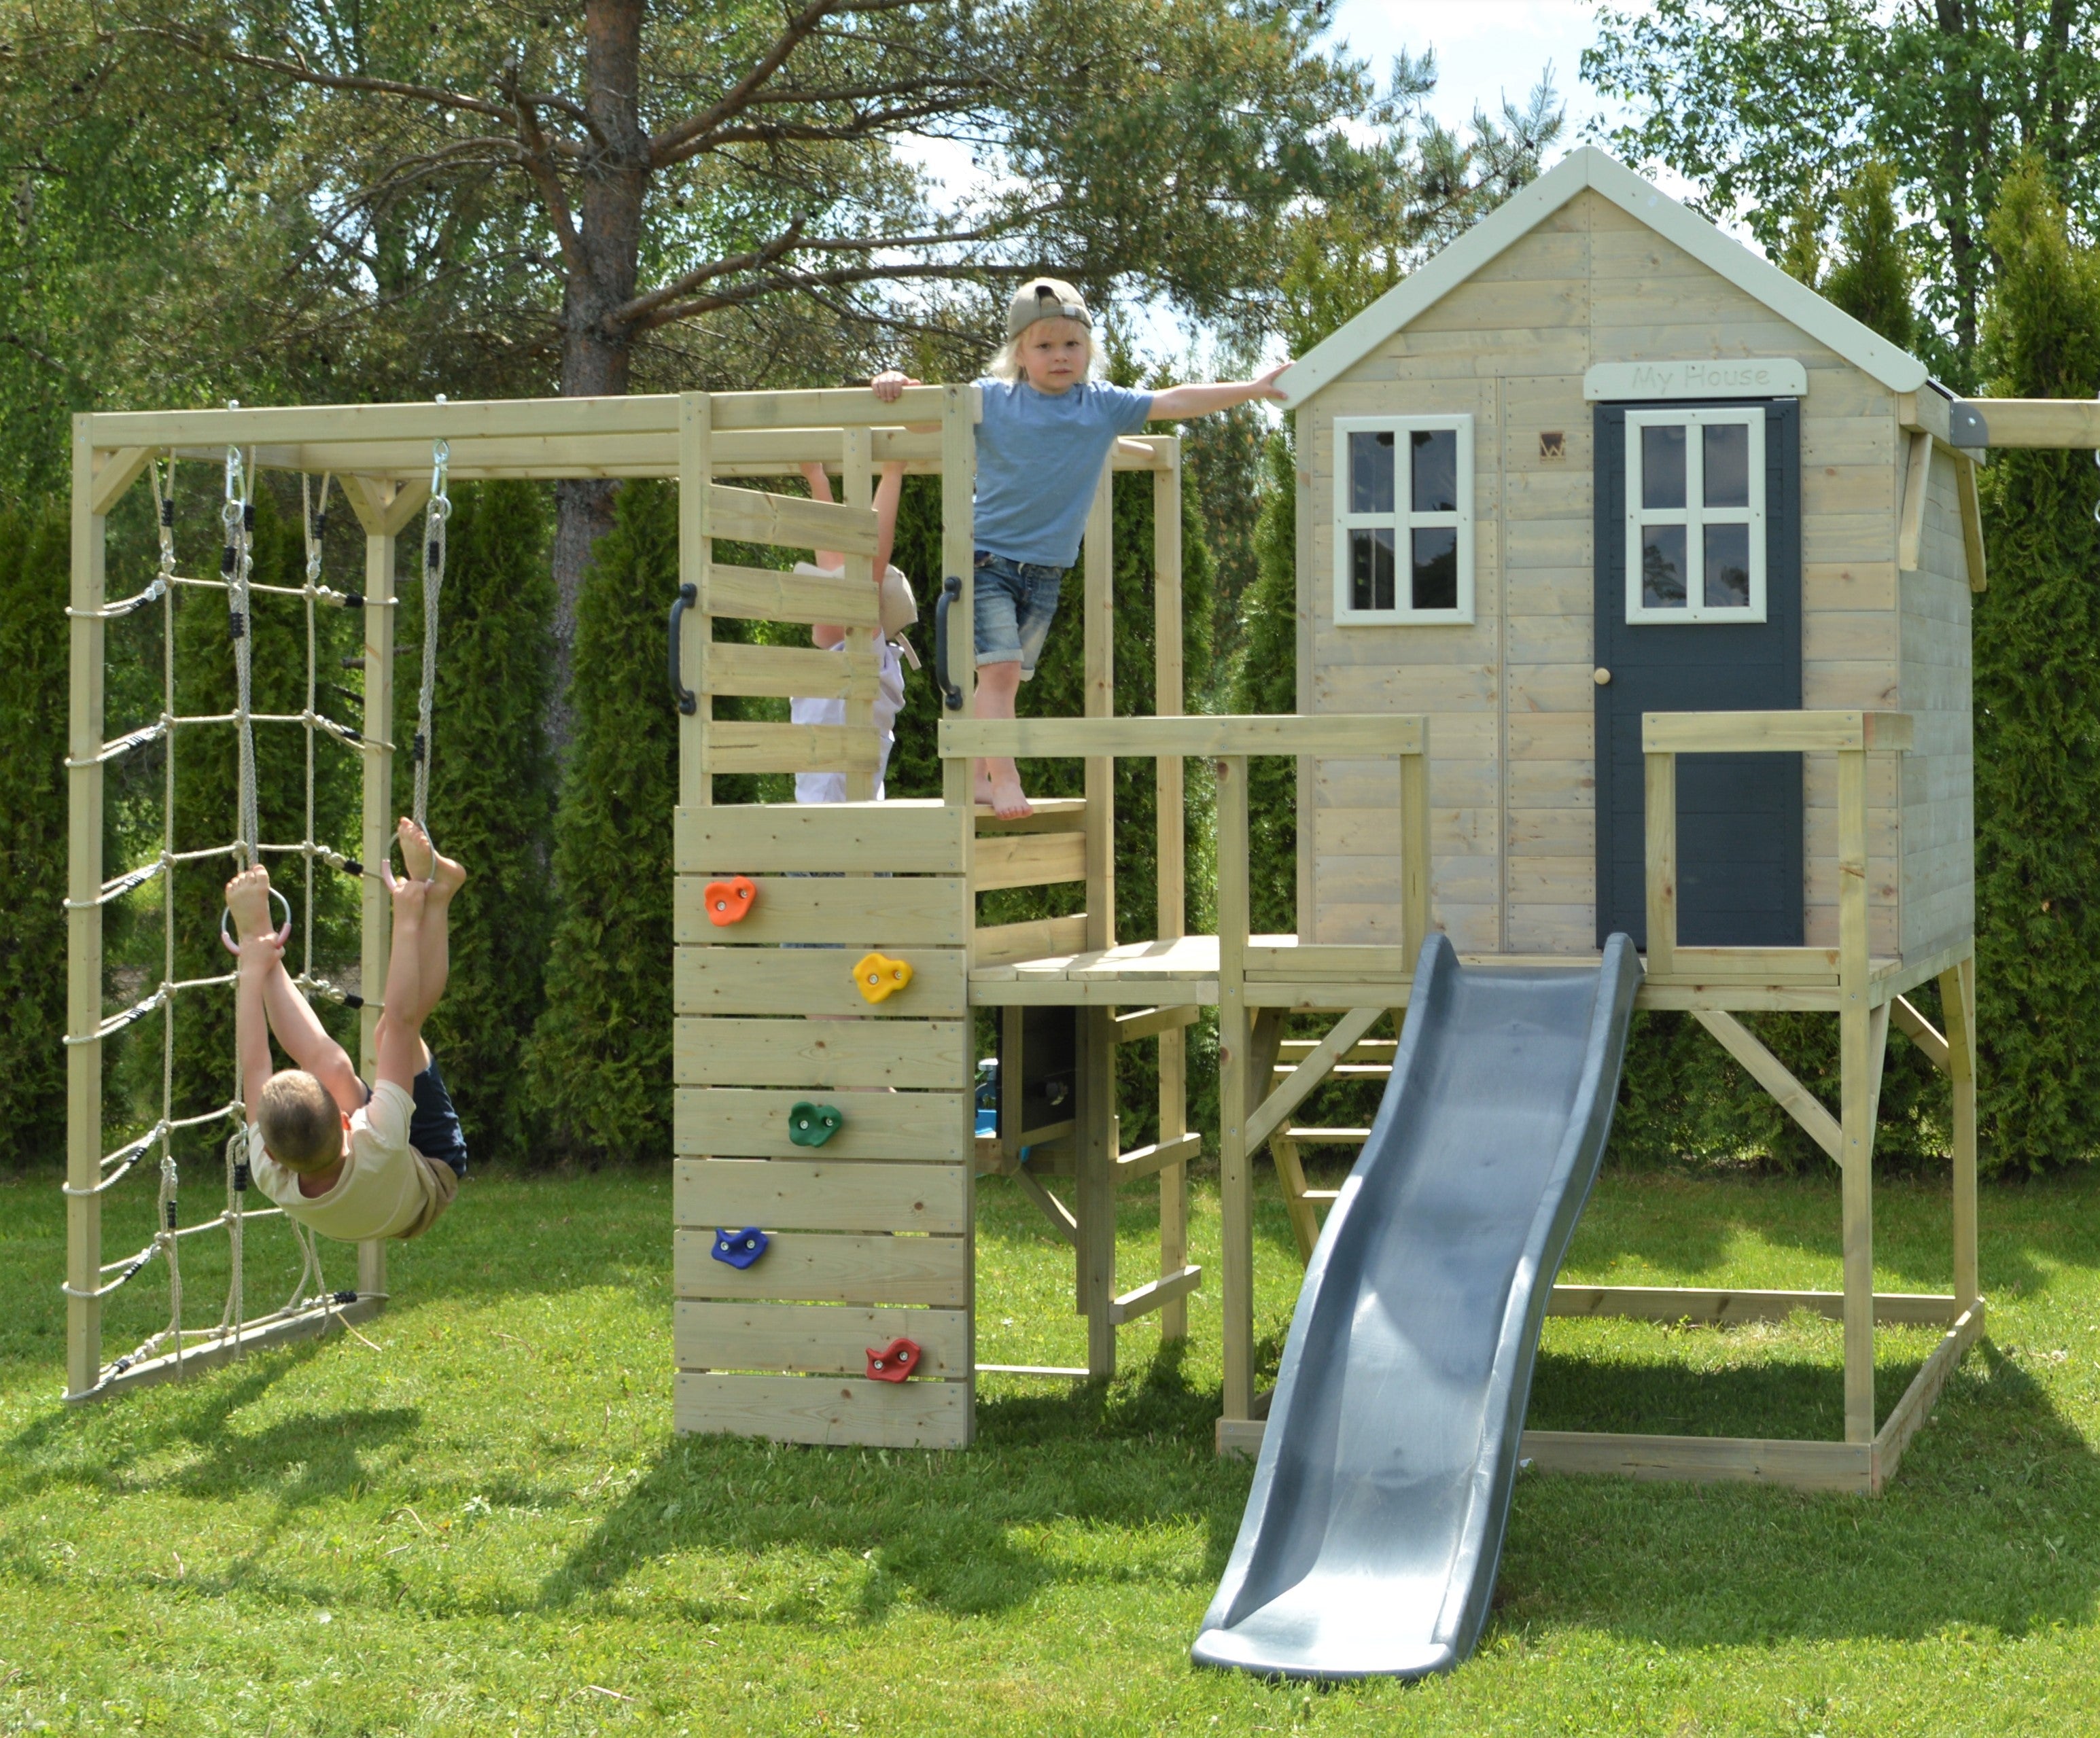 M28-G My Lodge with Platform, Slide and Double Swing + Gym Attachment